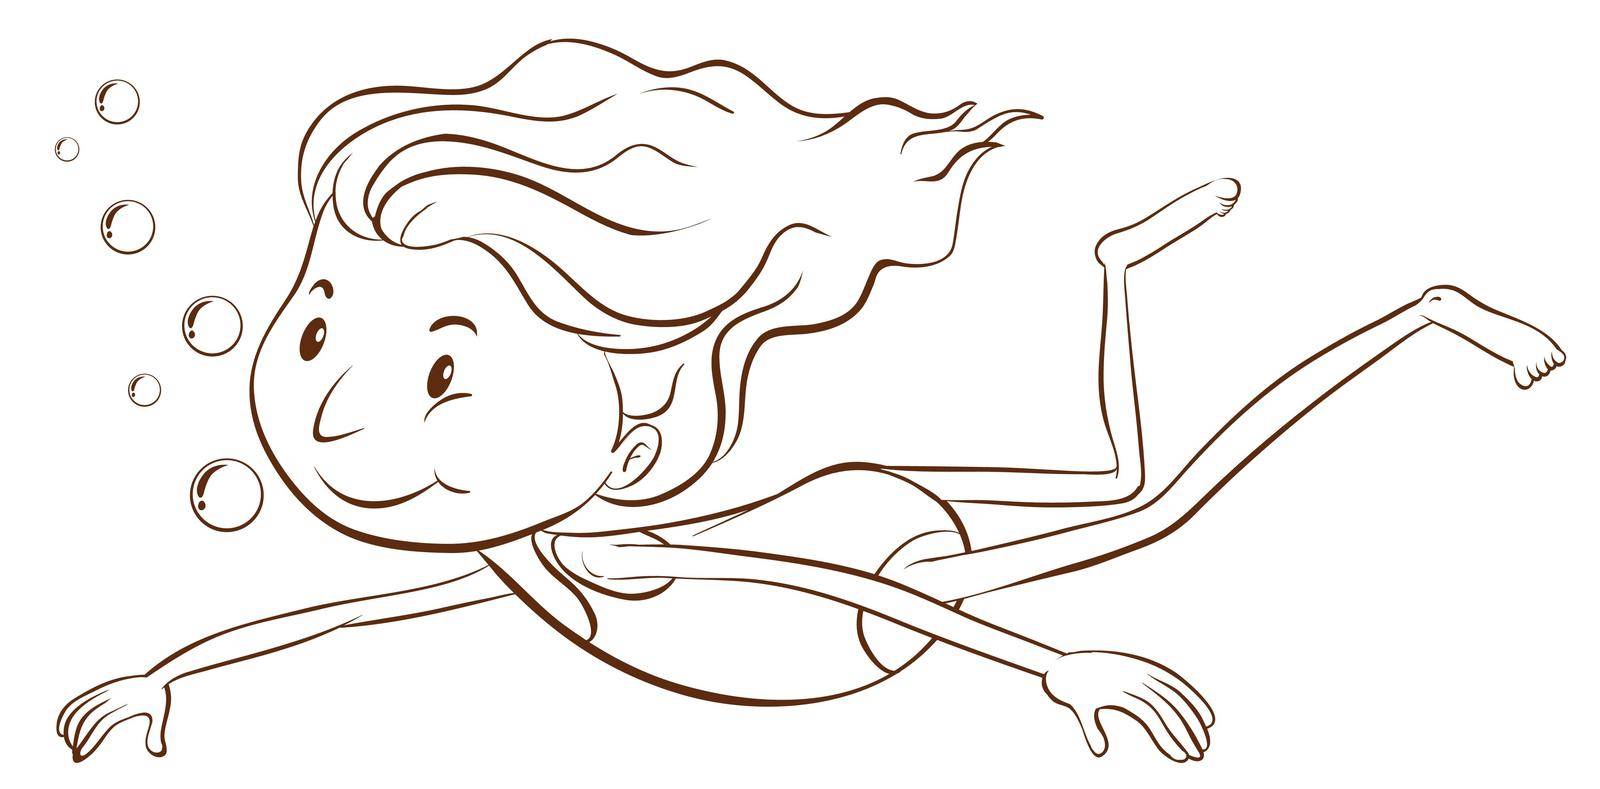 Illustration of a plain sketch of a girl swimming on a white background